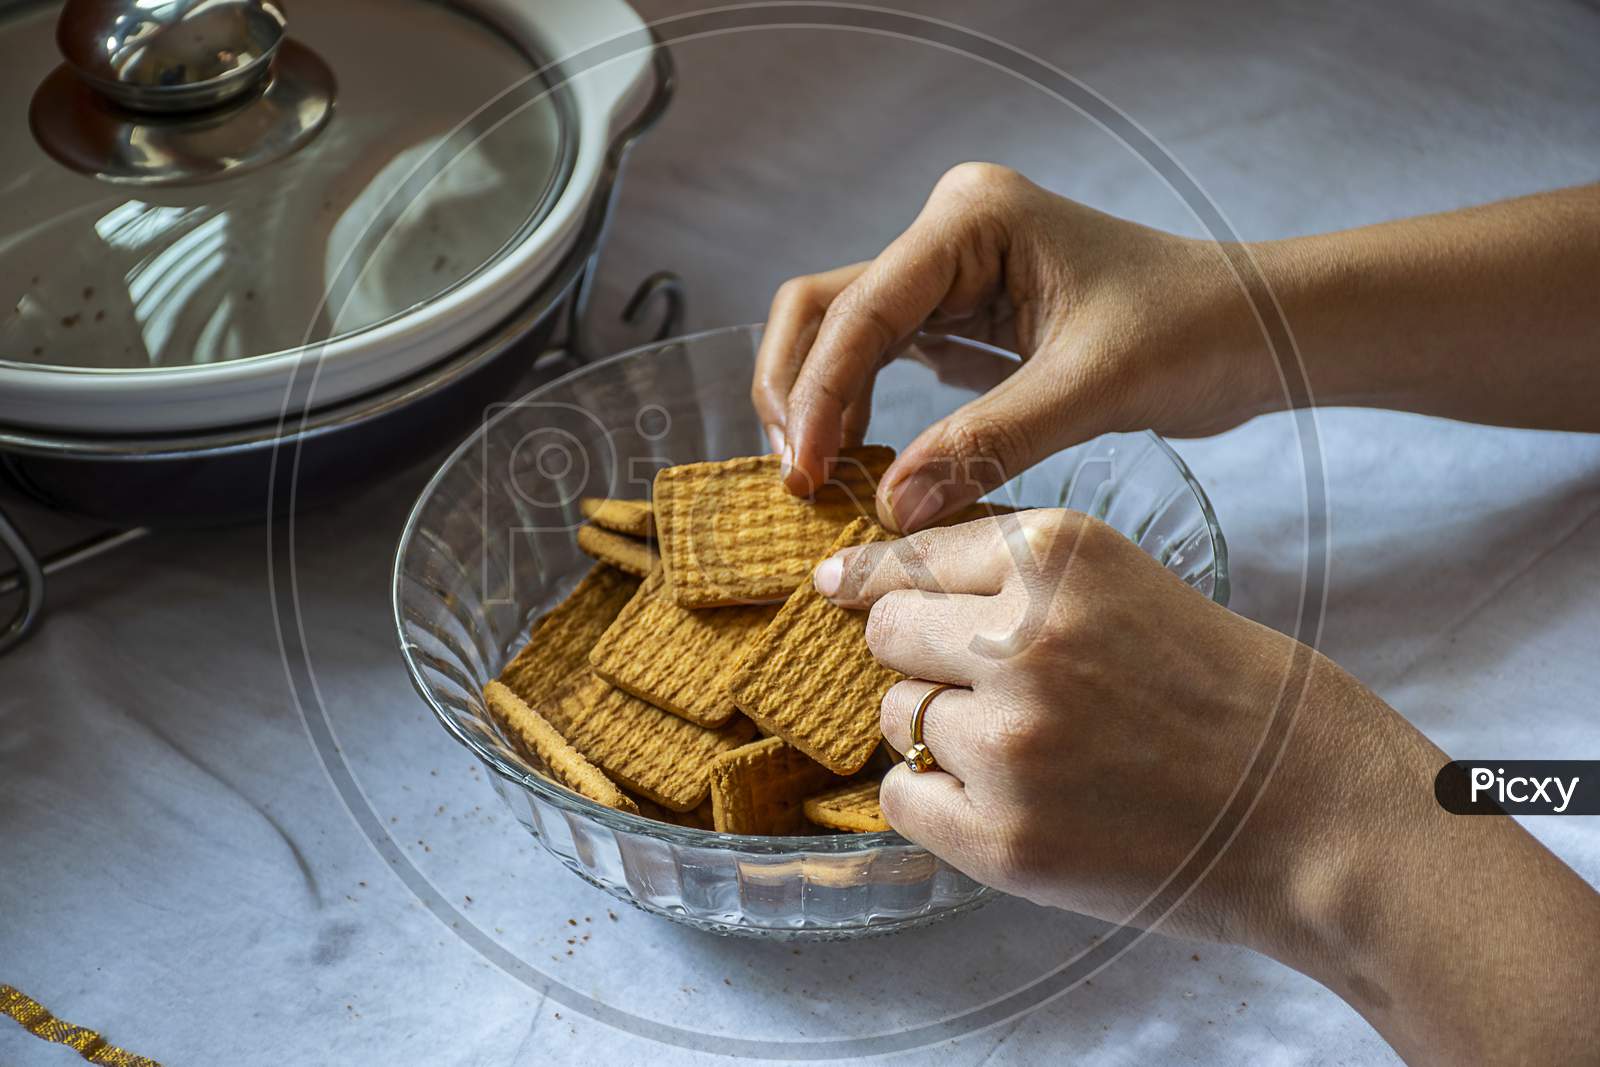 Stock Photo Of A Women Taking Wheat Biscuit From A Bowl Of Biscuits , Kept On Table On White Background. Focus On Biscuit.